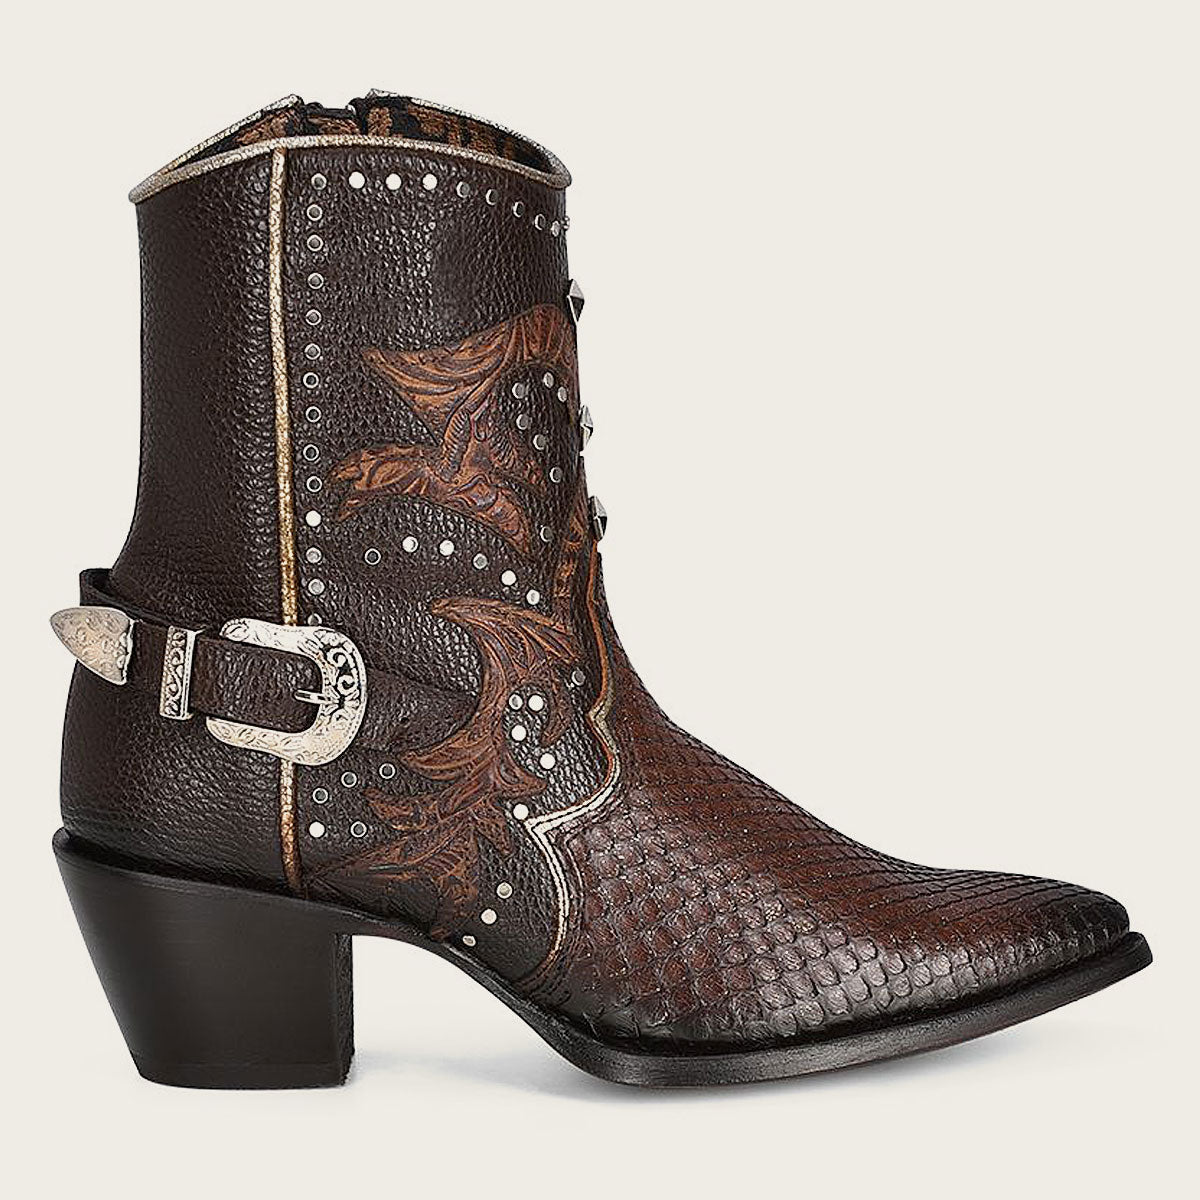 Strap around ankle with metallic buckle